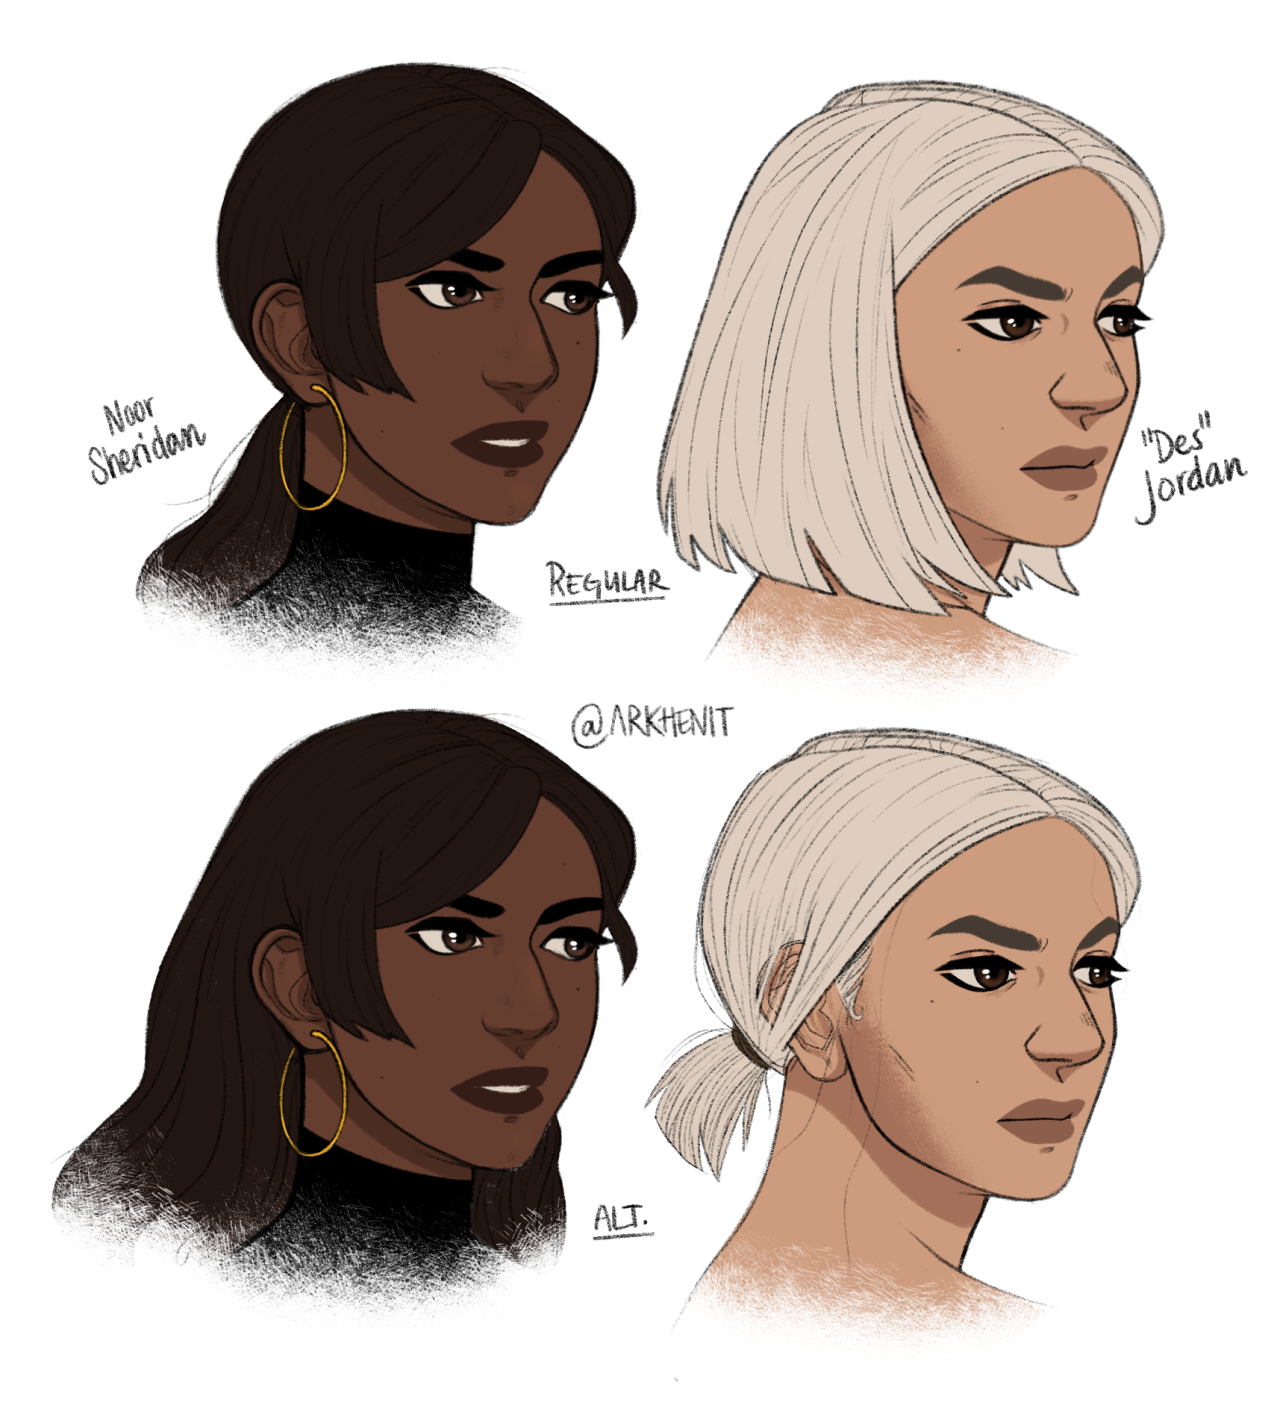 My other detectives, Noor Sheridan (N-mancer) and Des Jordan (Mason-mancer).Noor (30) is a people/psych+deduction/knowledge detective with a balanced heart-mind ratio with a snarky twist.Des (28) is a tech/science detective with a reservedness that could put Adam to shame. Seriously, nobody even knows her full name, aside from Rebecca. #The Wayhaven Chronicles #Wayhaven Chronicles#Wayhaven#wayhaven fanart#myart#my art#wayhaven detective#fanart